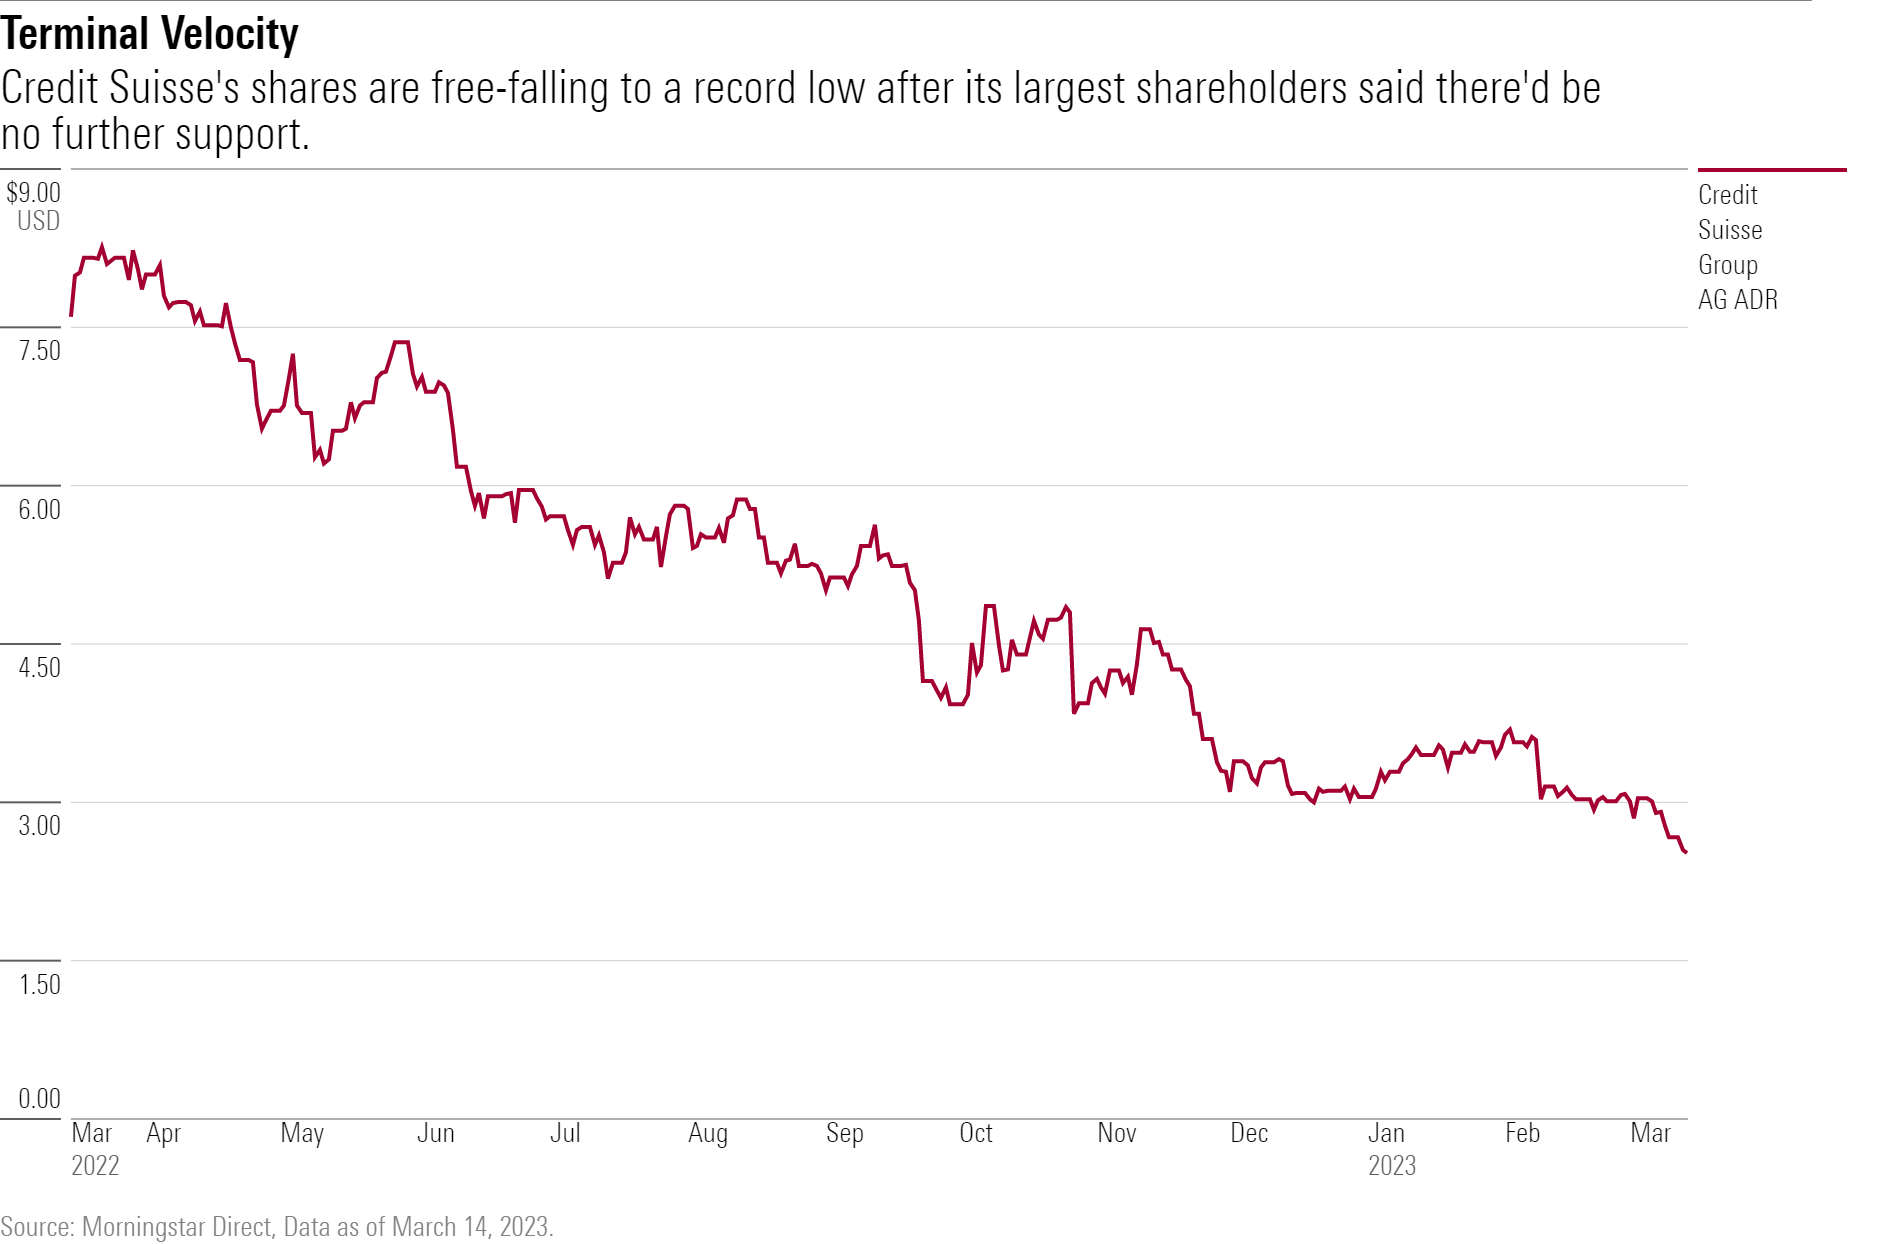 A line chart showing the decline of Credit Suisse's shares to an all-time low of CHF 1.56.